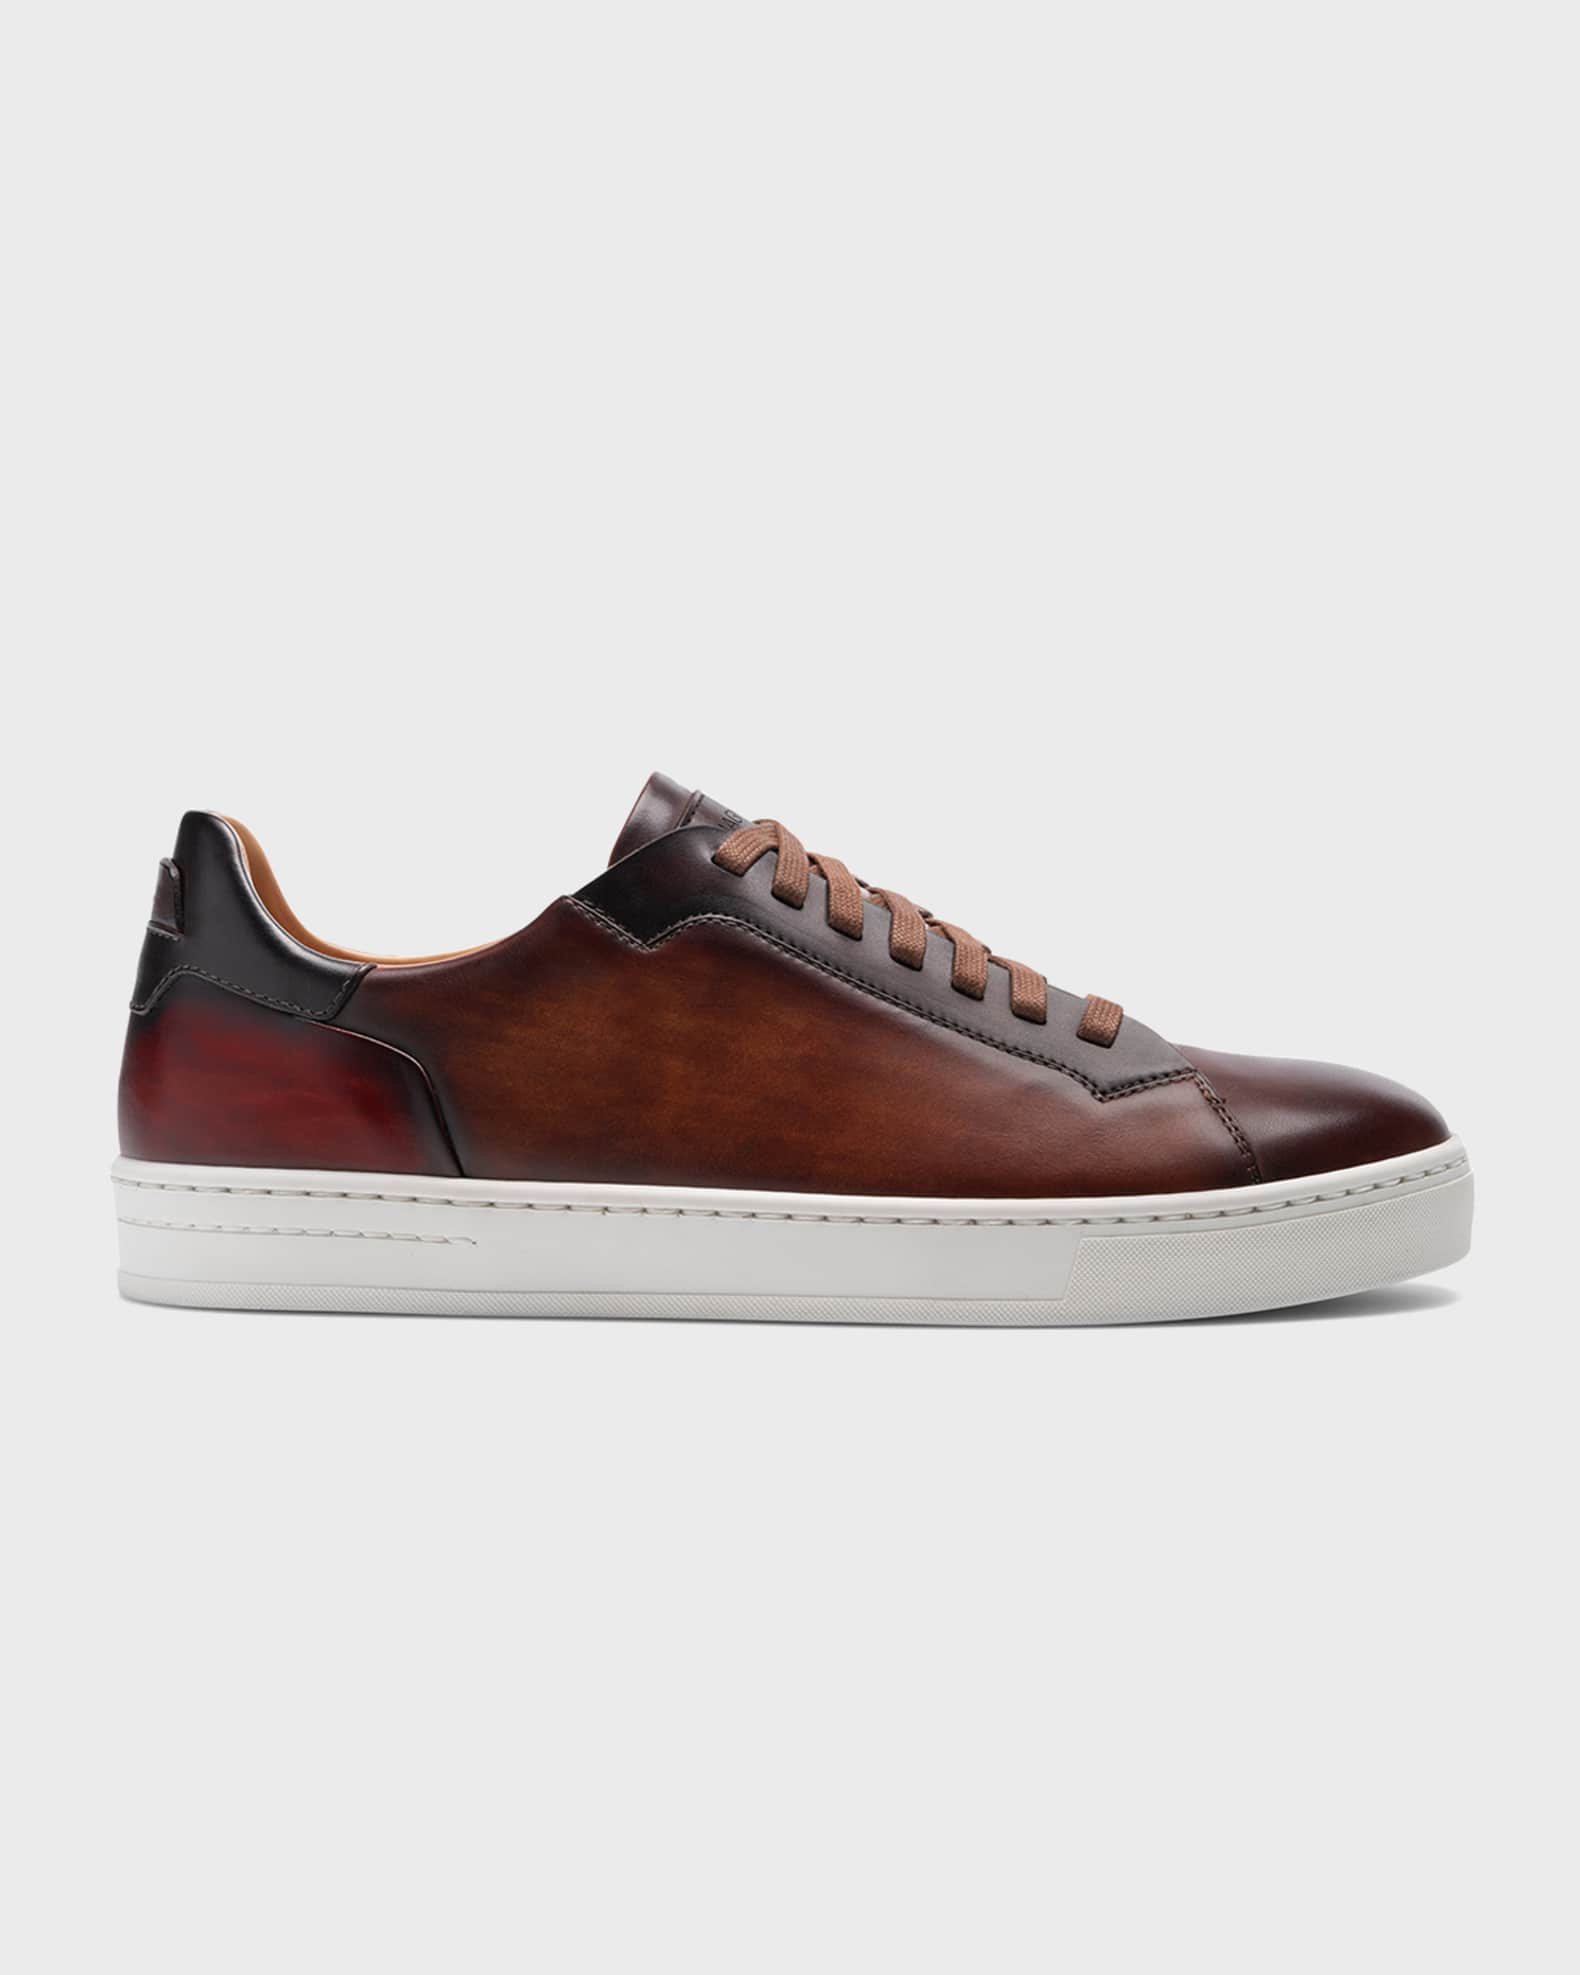 Magnanni Men's Burnished Leather Low-Top Sneakers Neiman